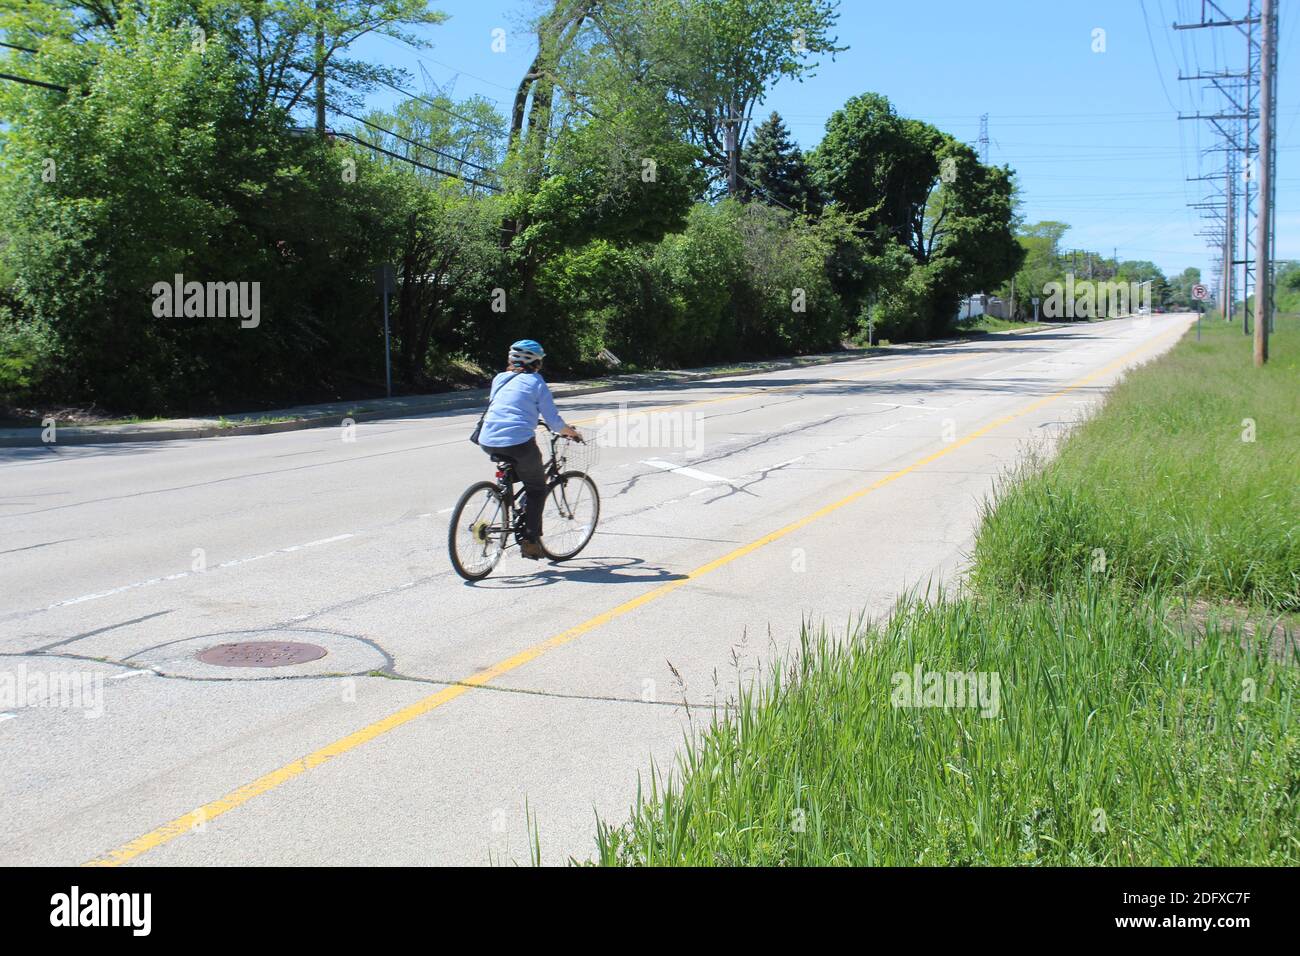 Older woman on a bicycle on Lehigh Avenue in Morton Grove, Illinois Stock Photo